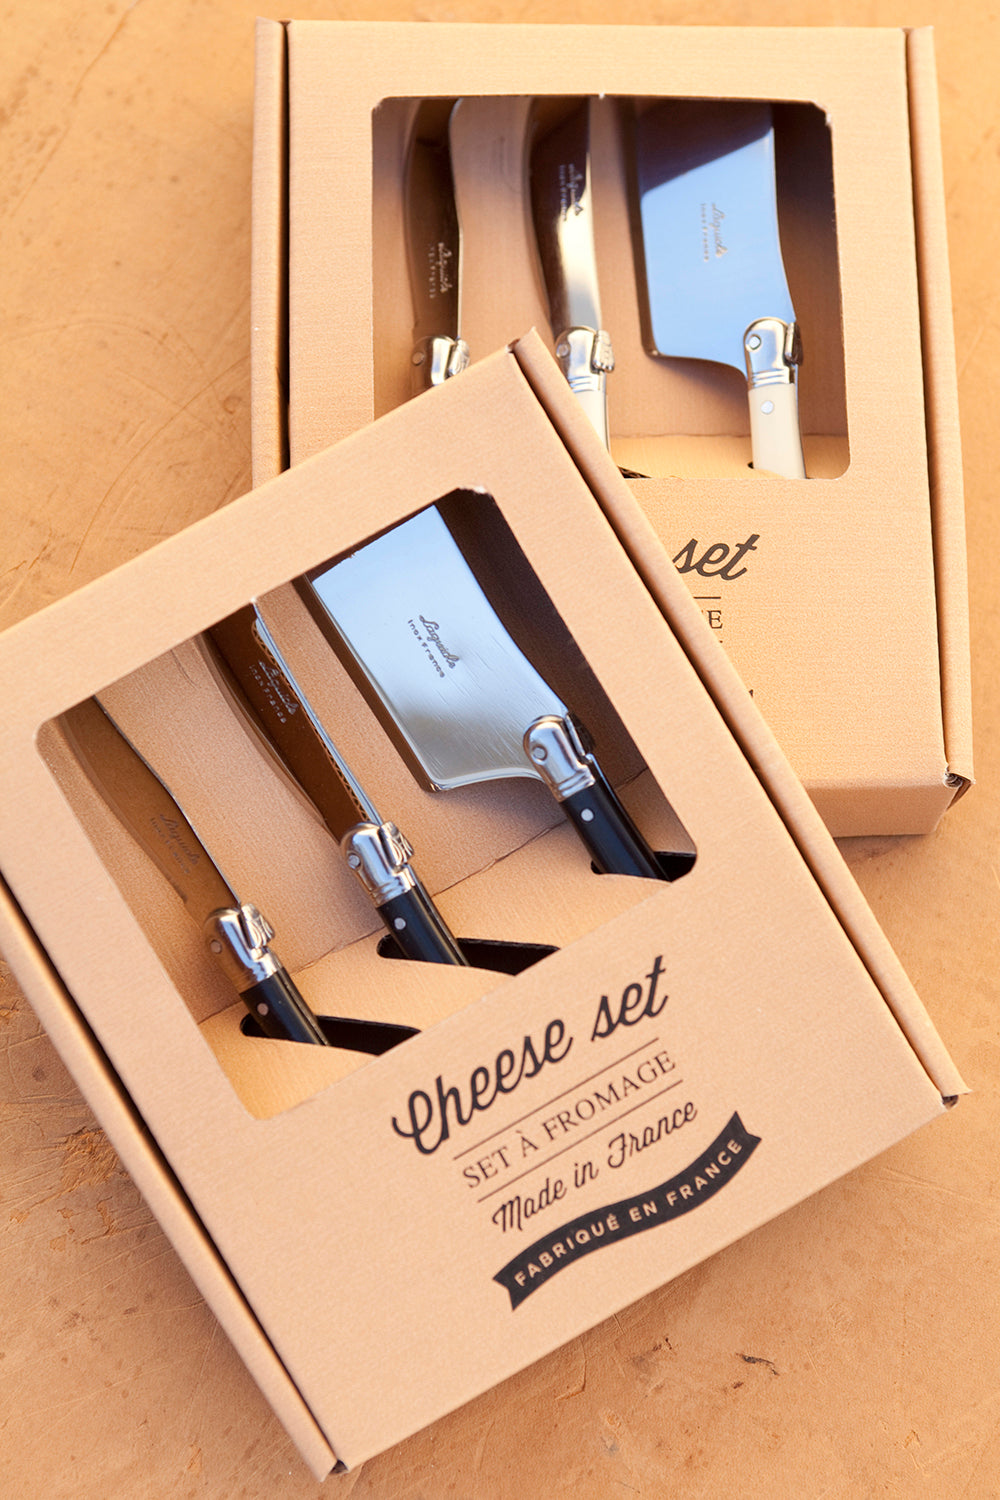 Laguiole Black Mini Cheese Set (Cutter, Spreader, Fork Tipped Knife) in Brown Box (Set of 3) Cutlery Set Laguiole Brand_Laguiole Gift Sets Kitchen_Dinnerware Kitchen_Kitchenware Knife Sets Laguiole Mini Cheese Sets Spring Collection 6_13_16_LG_111